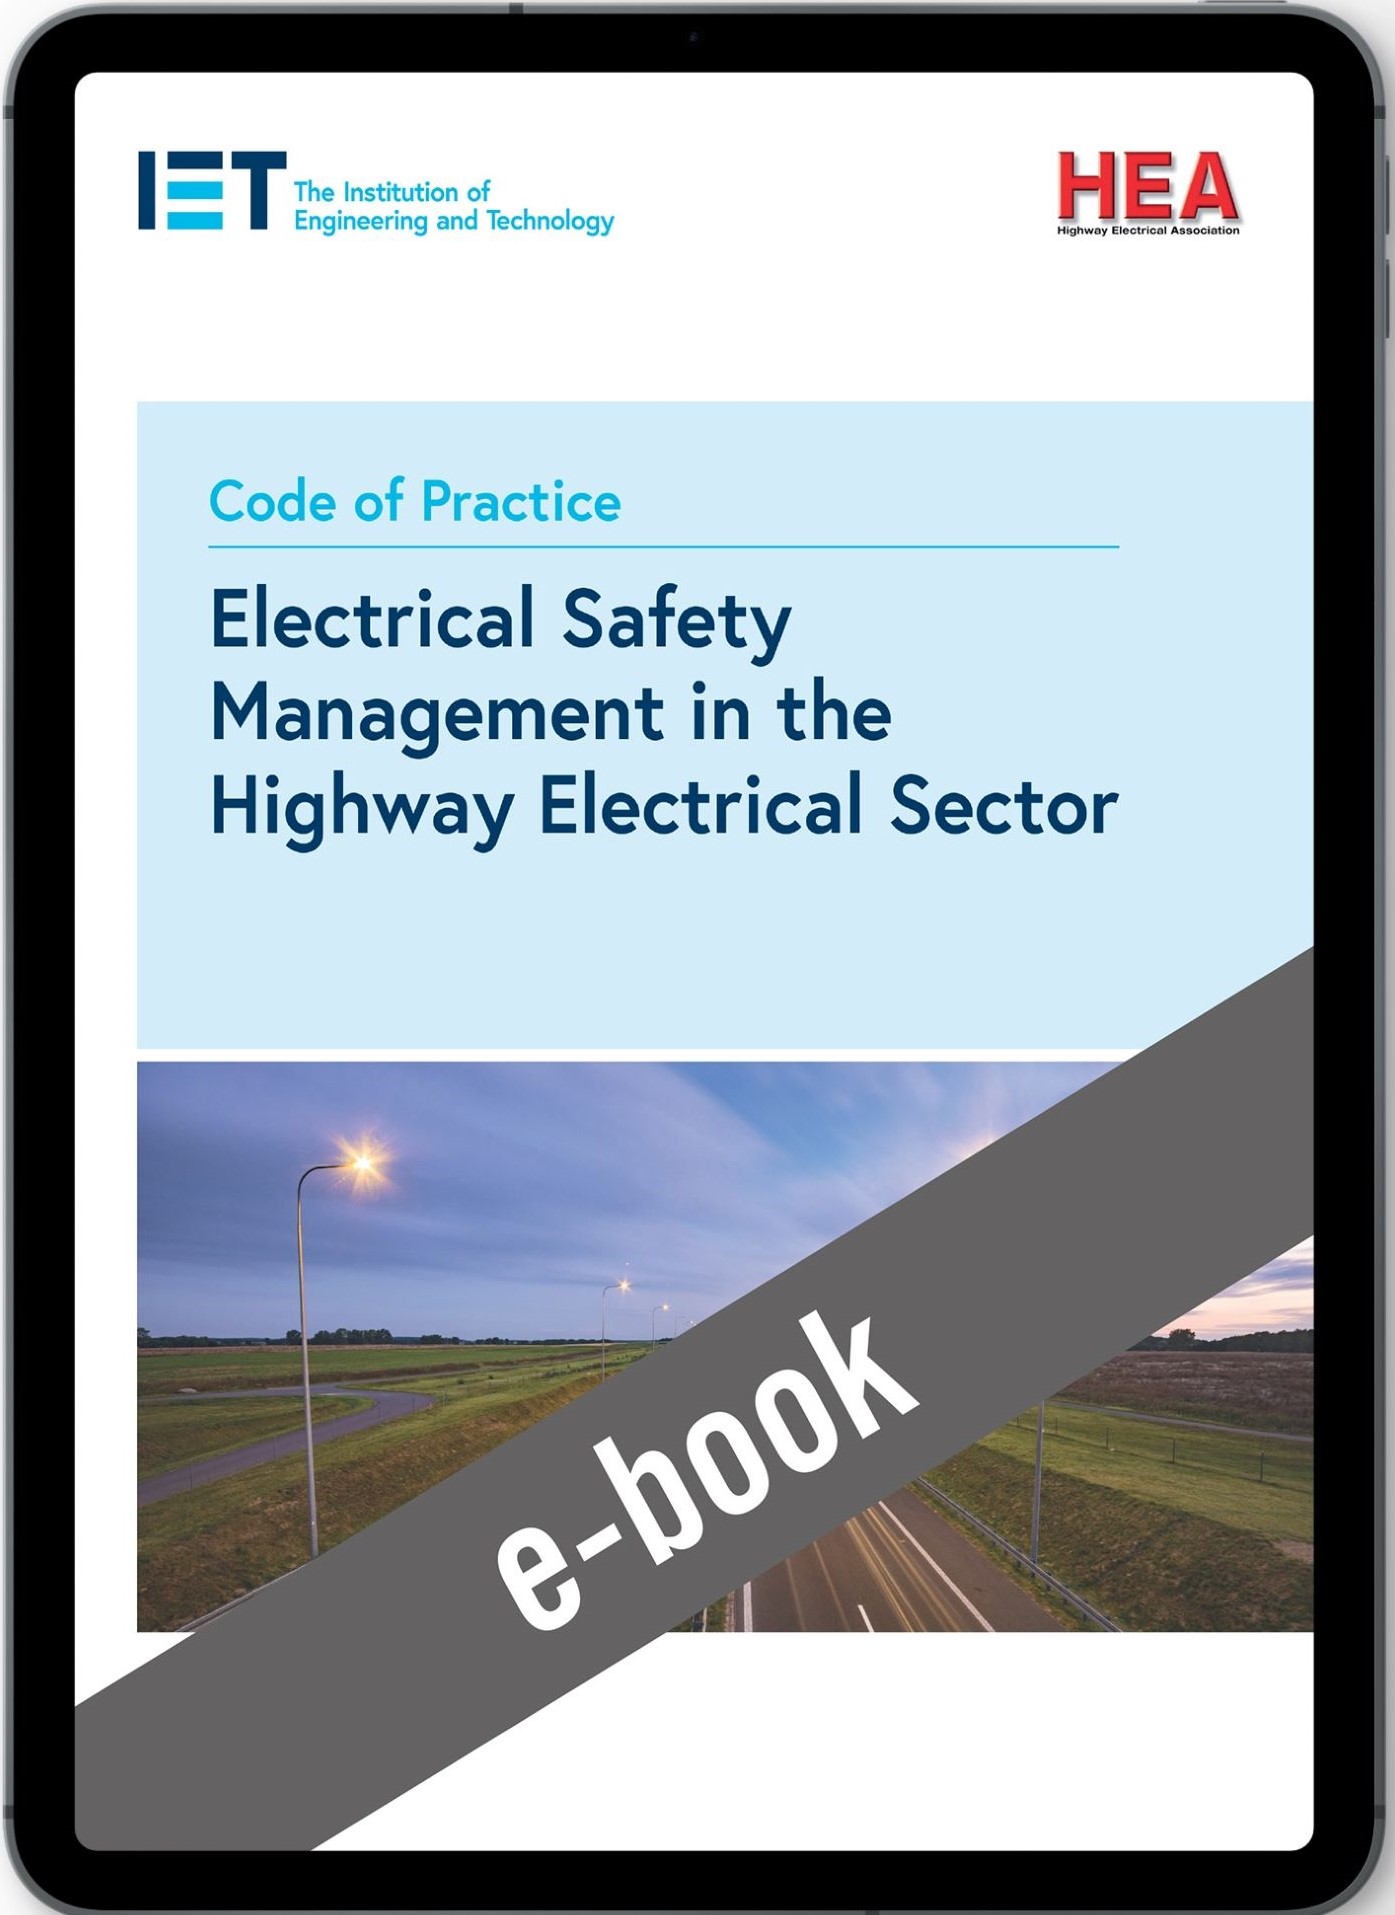 Code of Practice for Electrical Safety Management in the Highway Electrical Sector (VS)